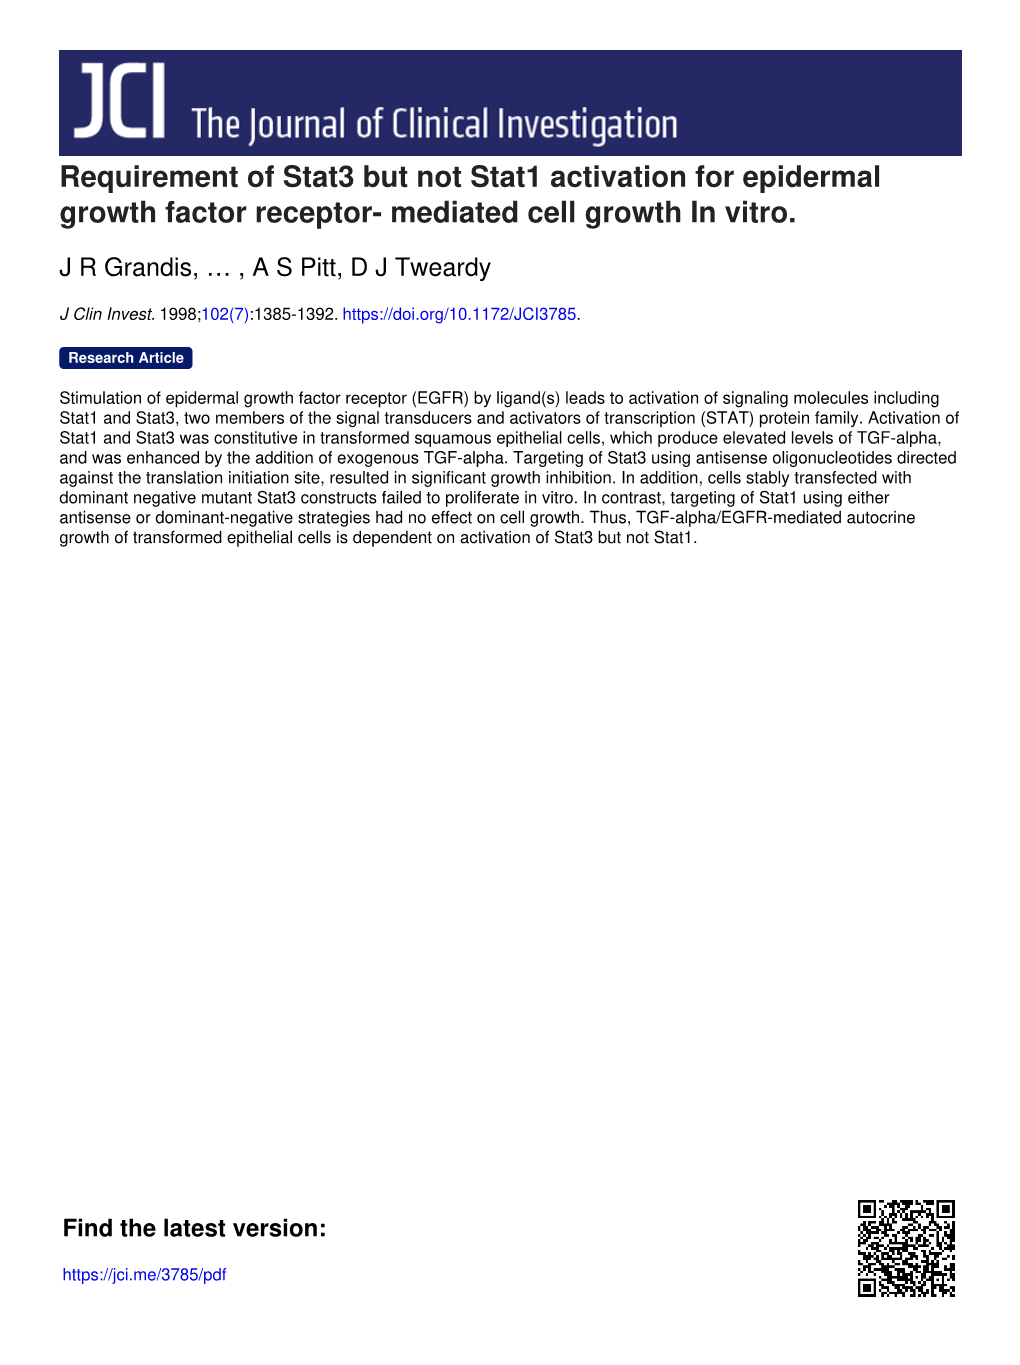 Requirement of Stat3 but Not Stat1 Activation for Epidermal Growth Factor Receptor- Mediated Cell Growth in Vitro